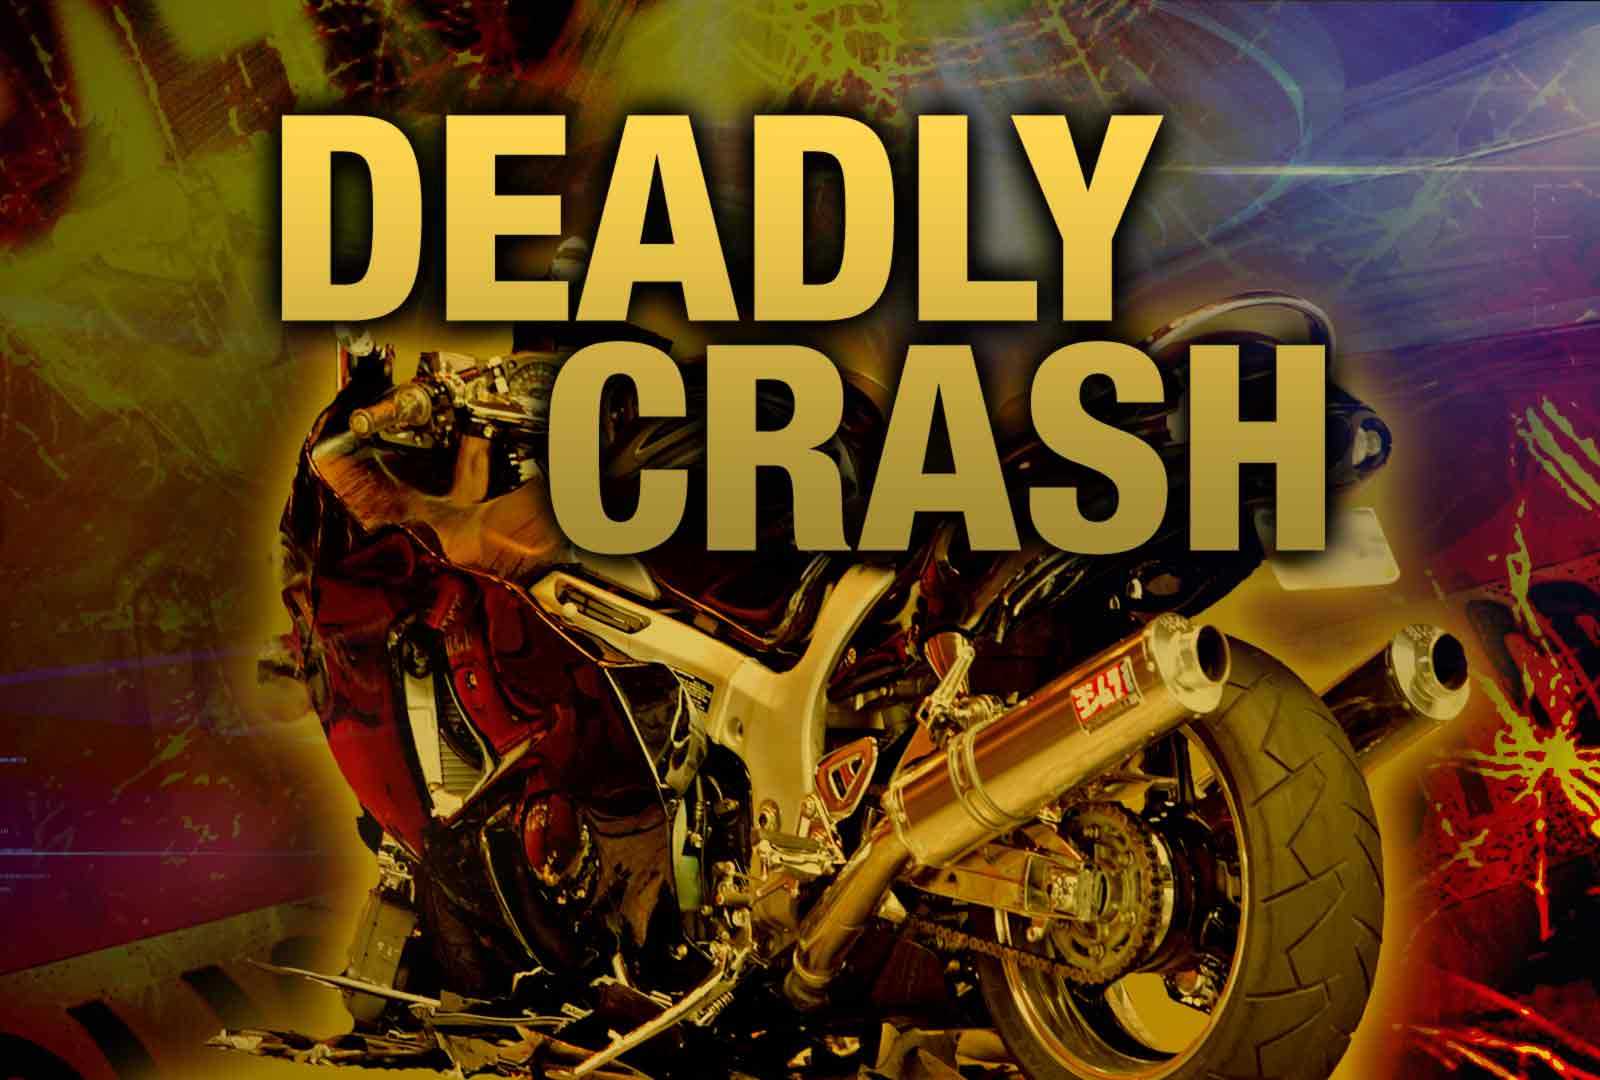 St. Thomas Man Dies In Motorcycle Accident Monday Afternoon: VIPD